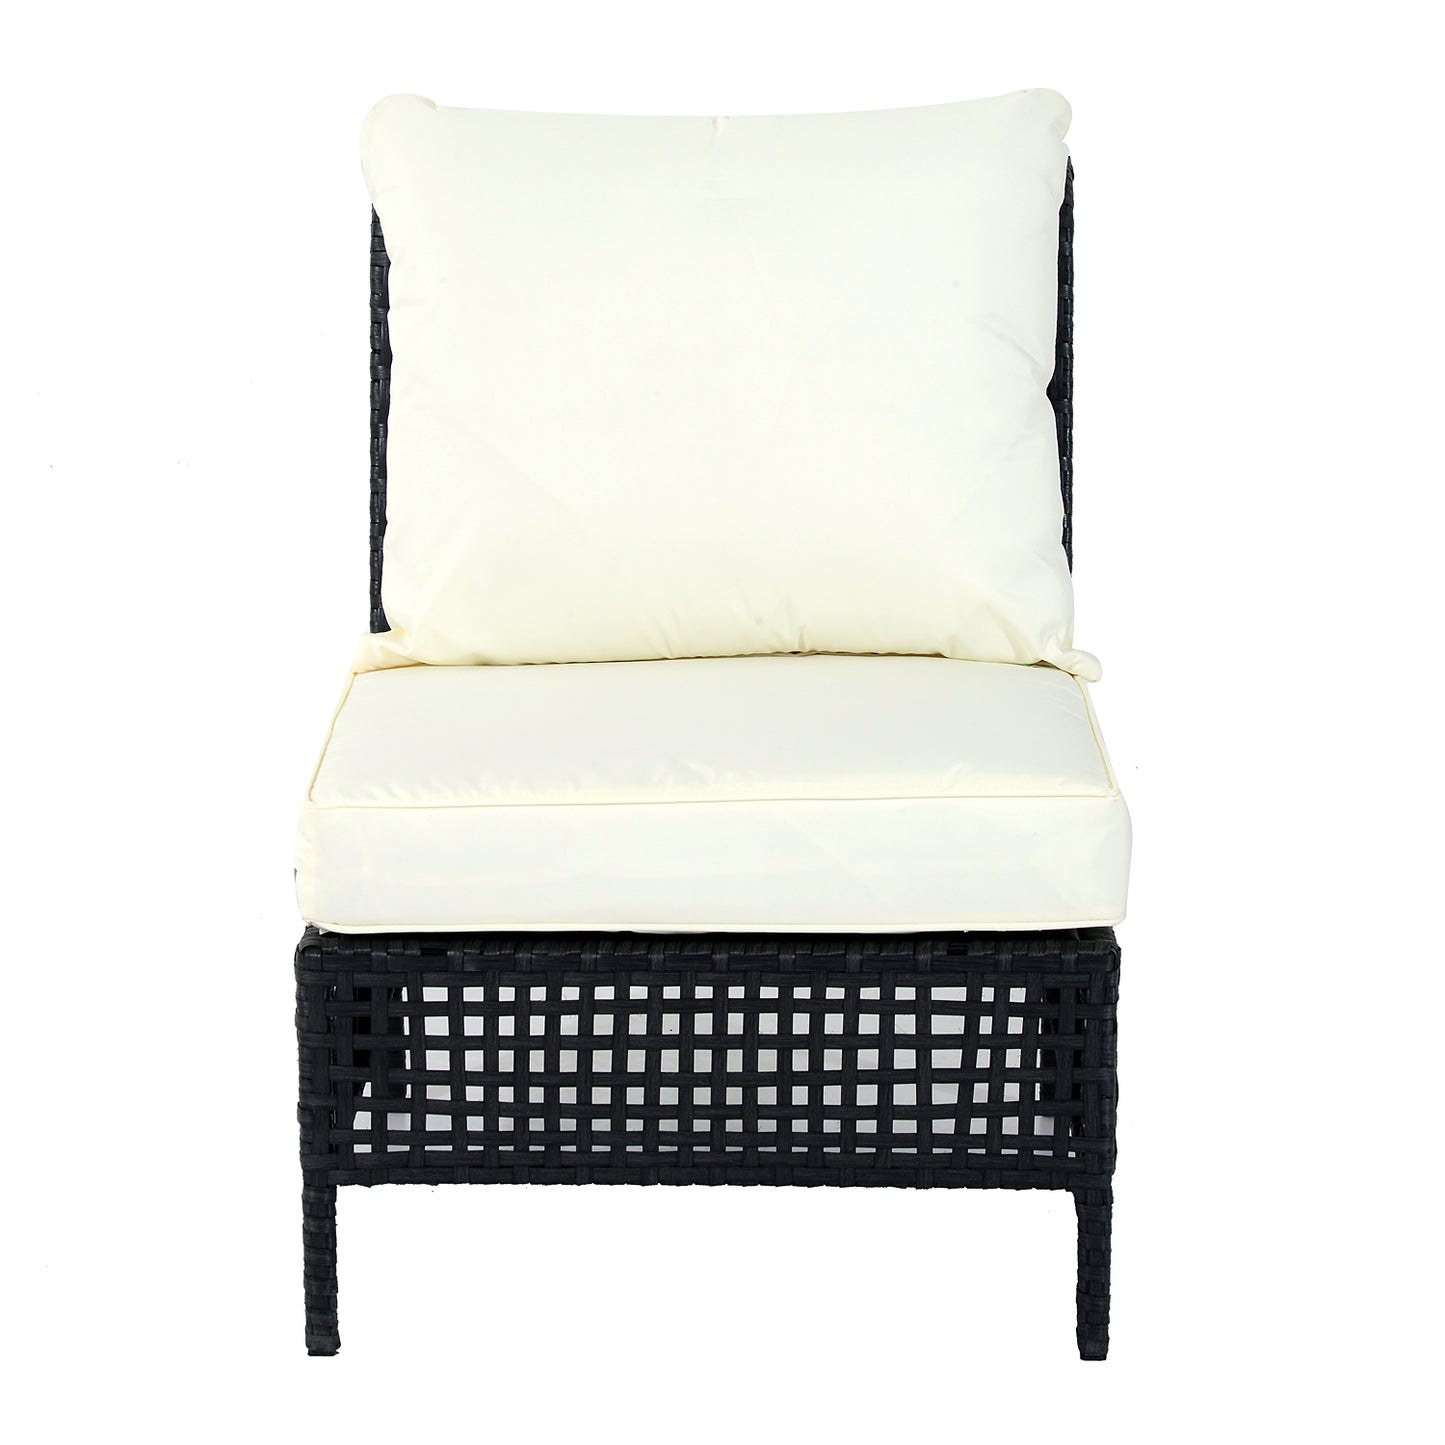 Outsunny Rattan Armless Chair, 80Lx60Wx82H cm-Black/Beige